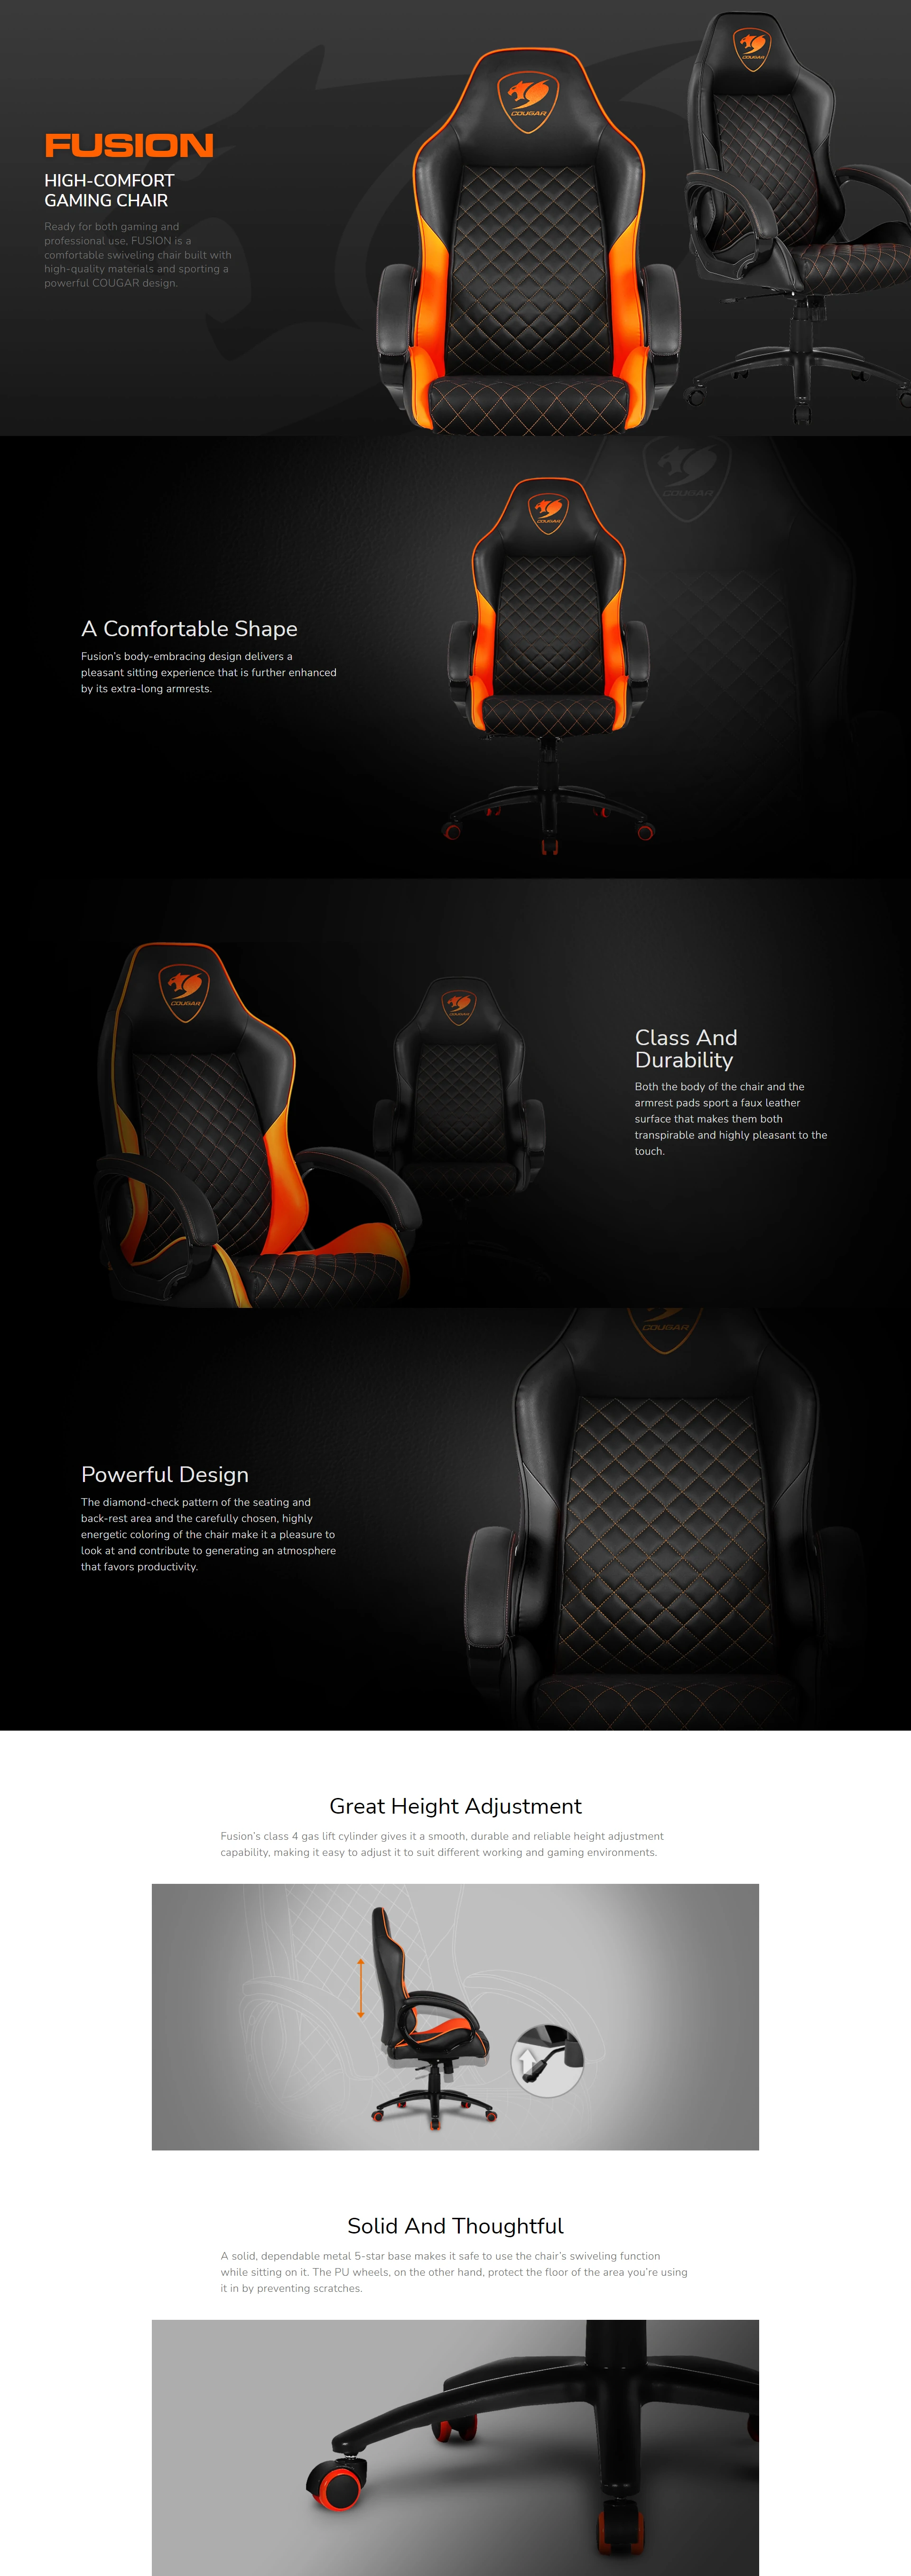 Overview - Cougar - Fusion Gaming Chair